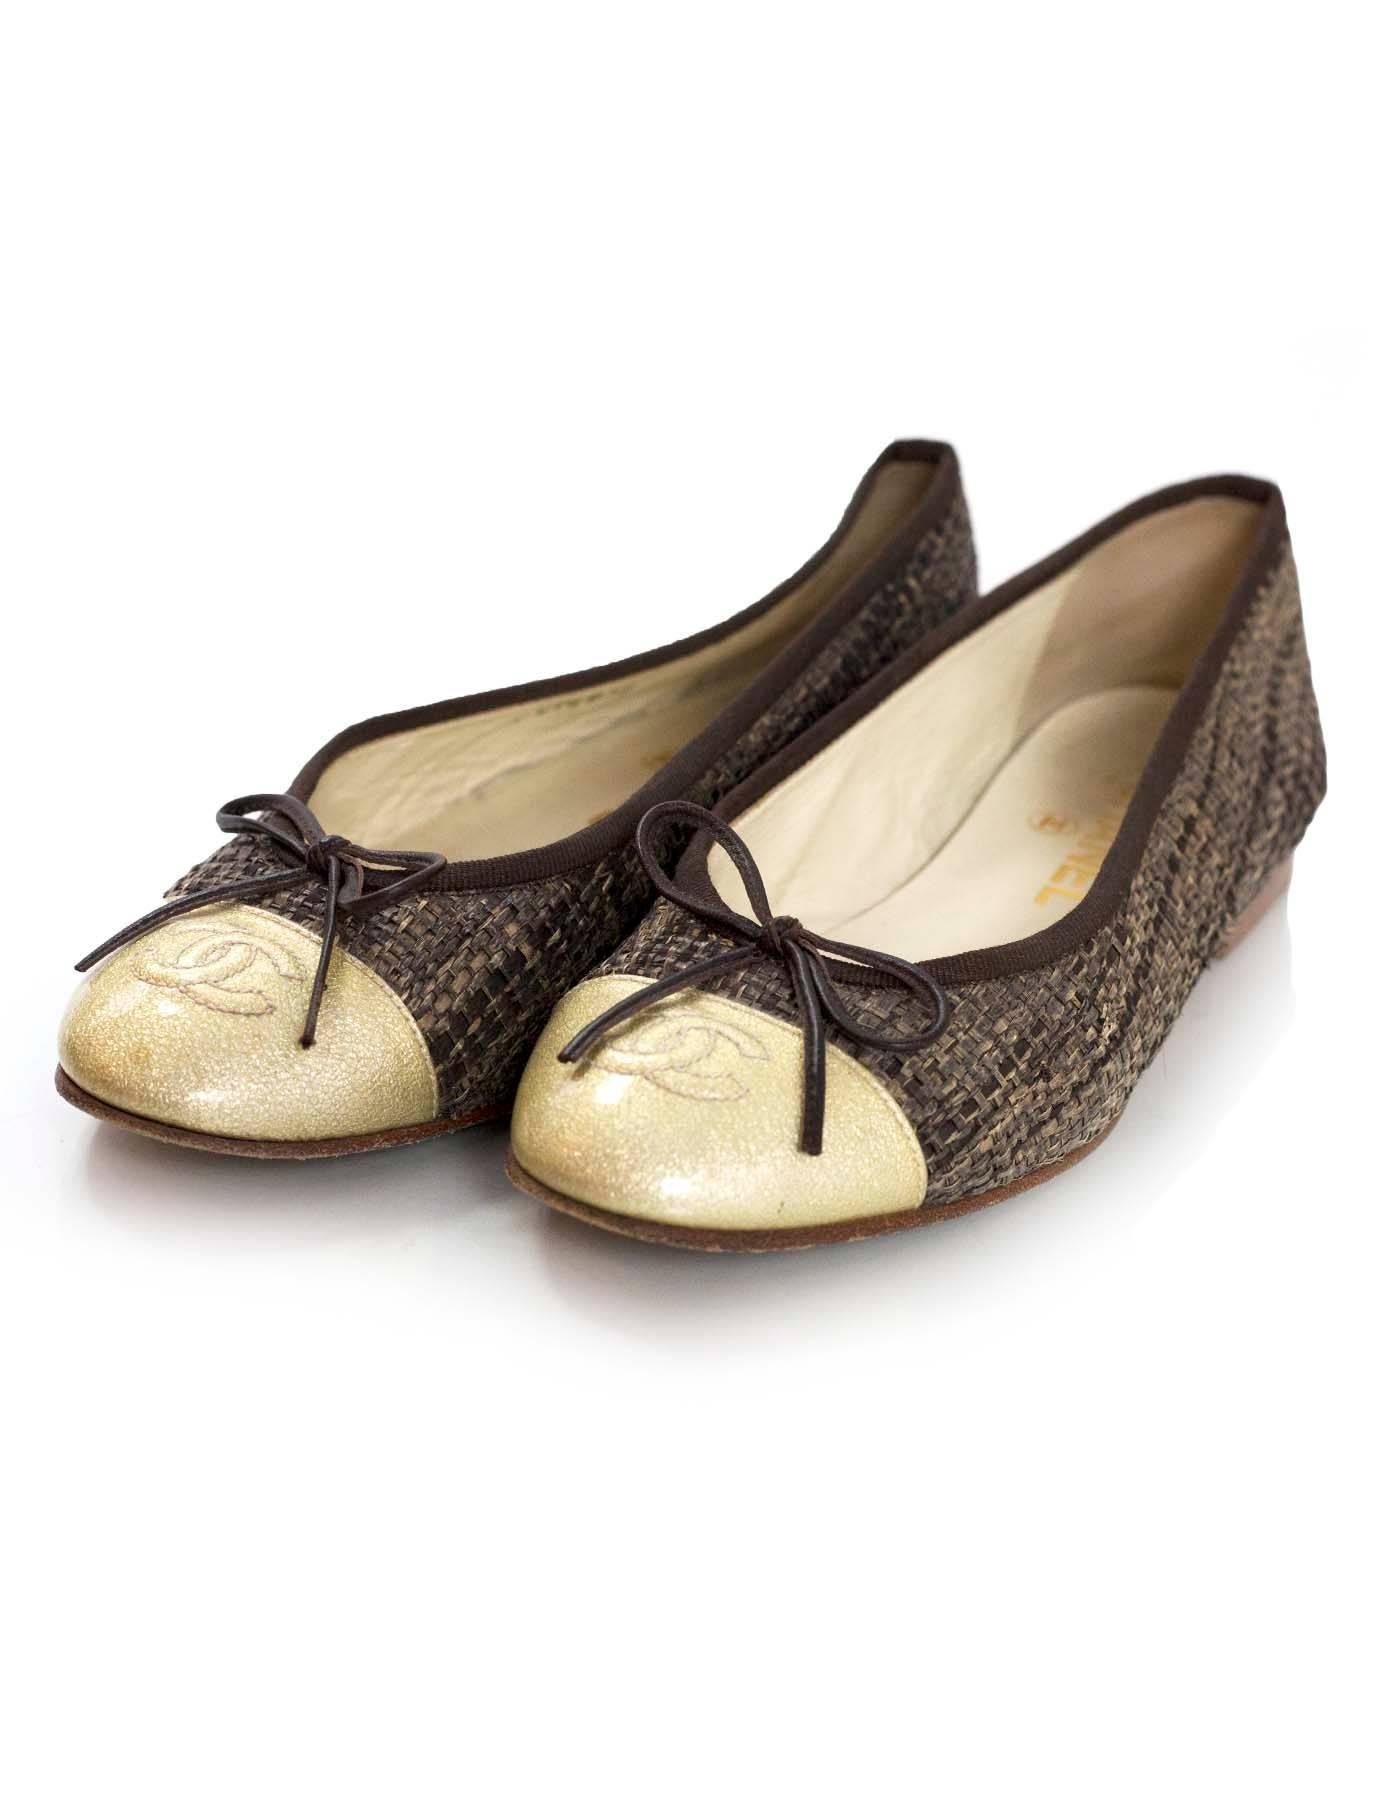 Chanel Brown Woven CC Cap-Toe Flats Sz 36

Made In: Italy
Color: Brown, gold
Materials: Raffia, patent leather, leather
Closure/Opening: Slide on
Sole Stamp: CC made in italy 36
Overall Condition: Very good pre-owned condition with the exception of